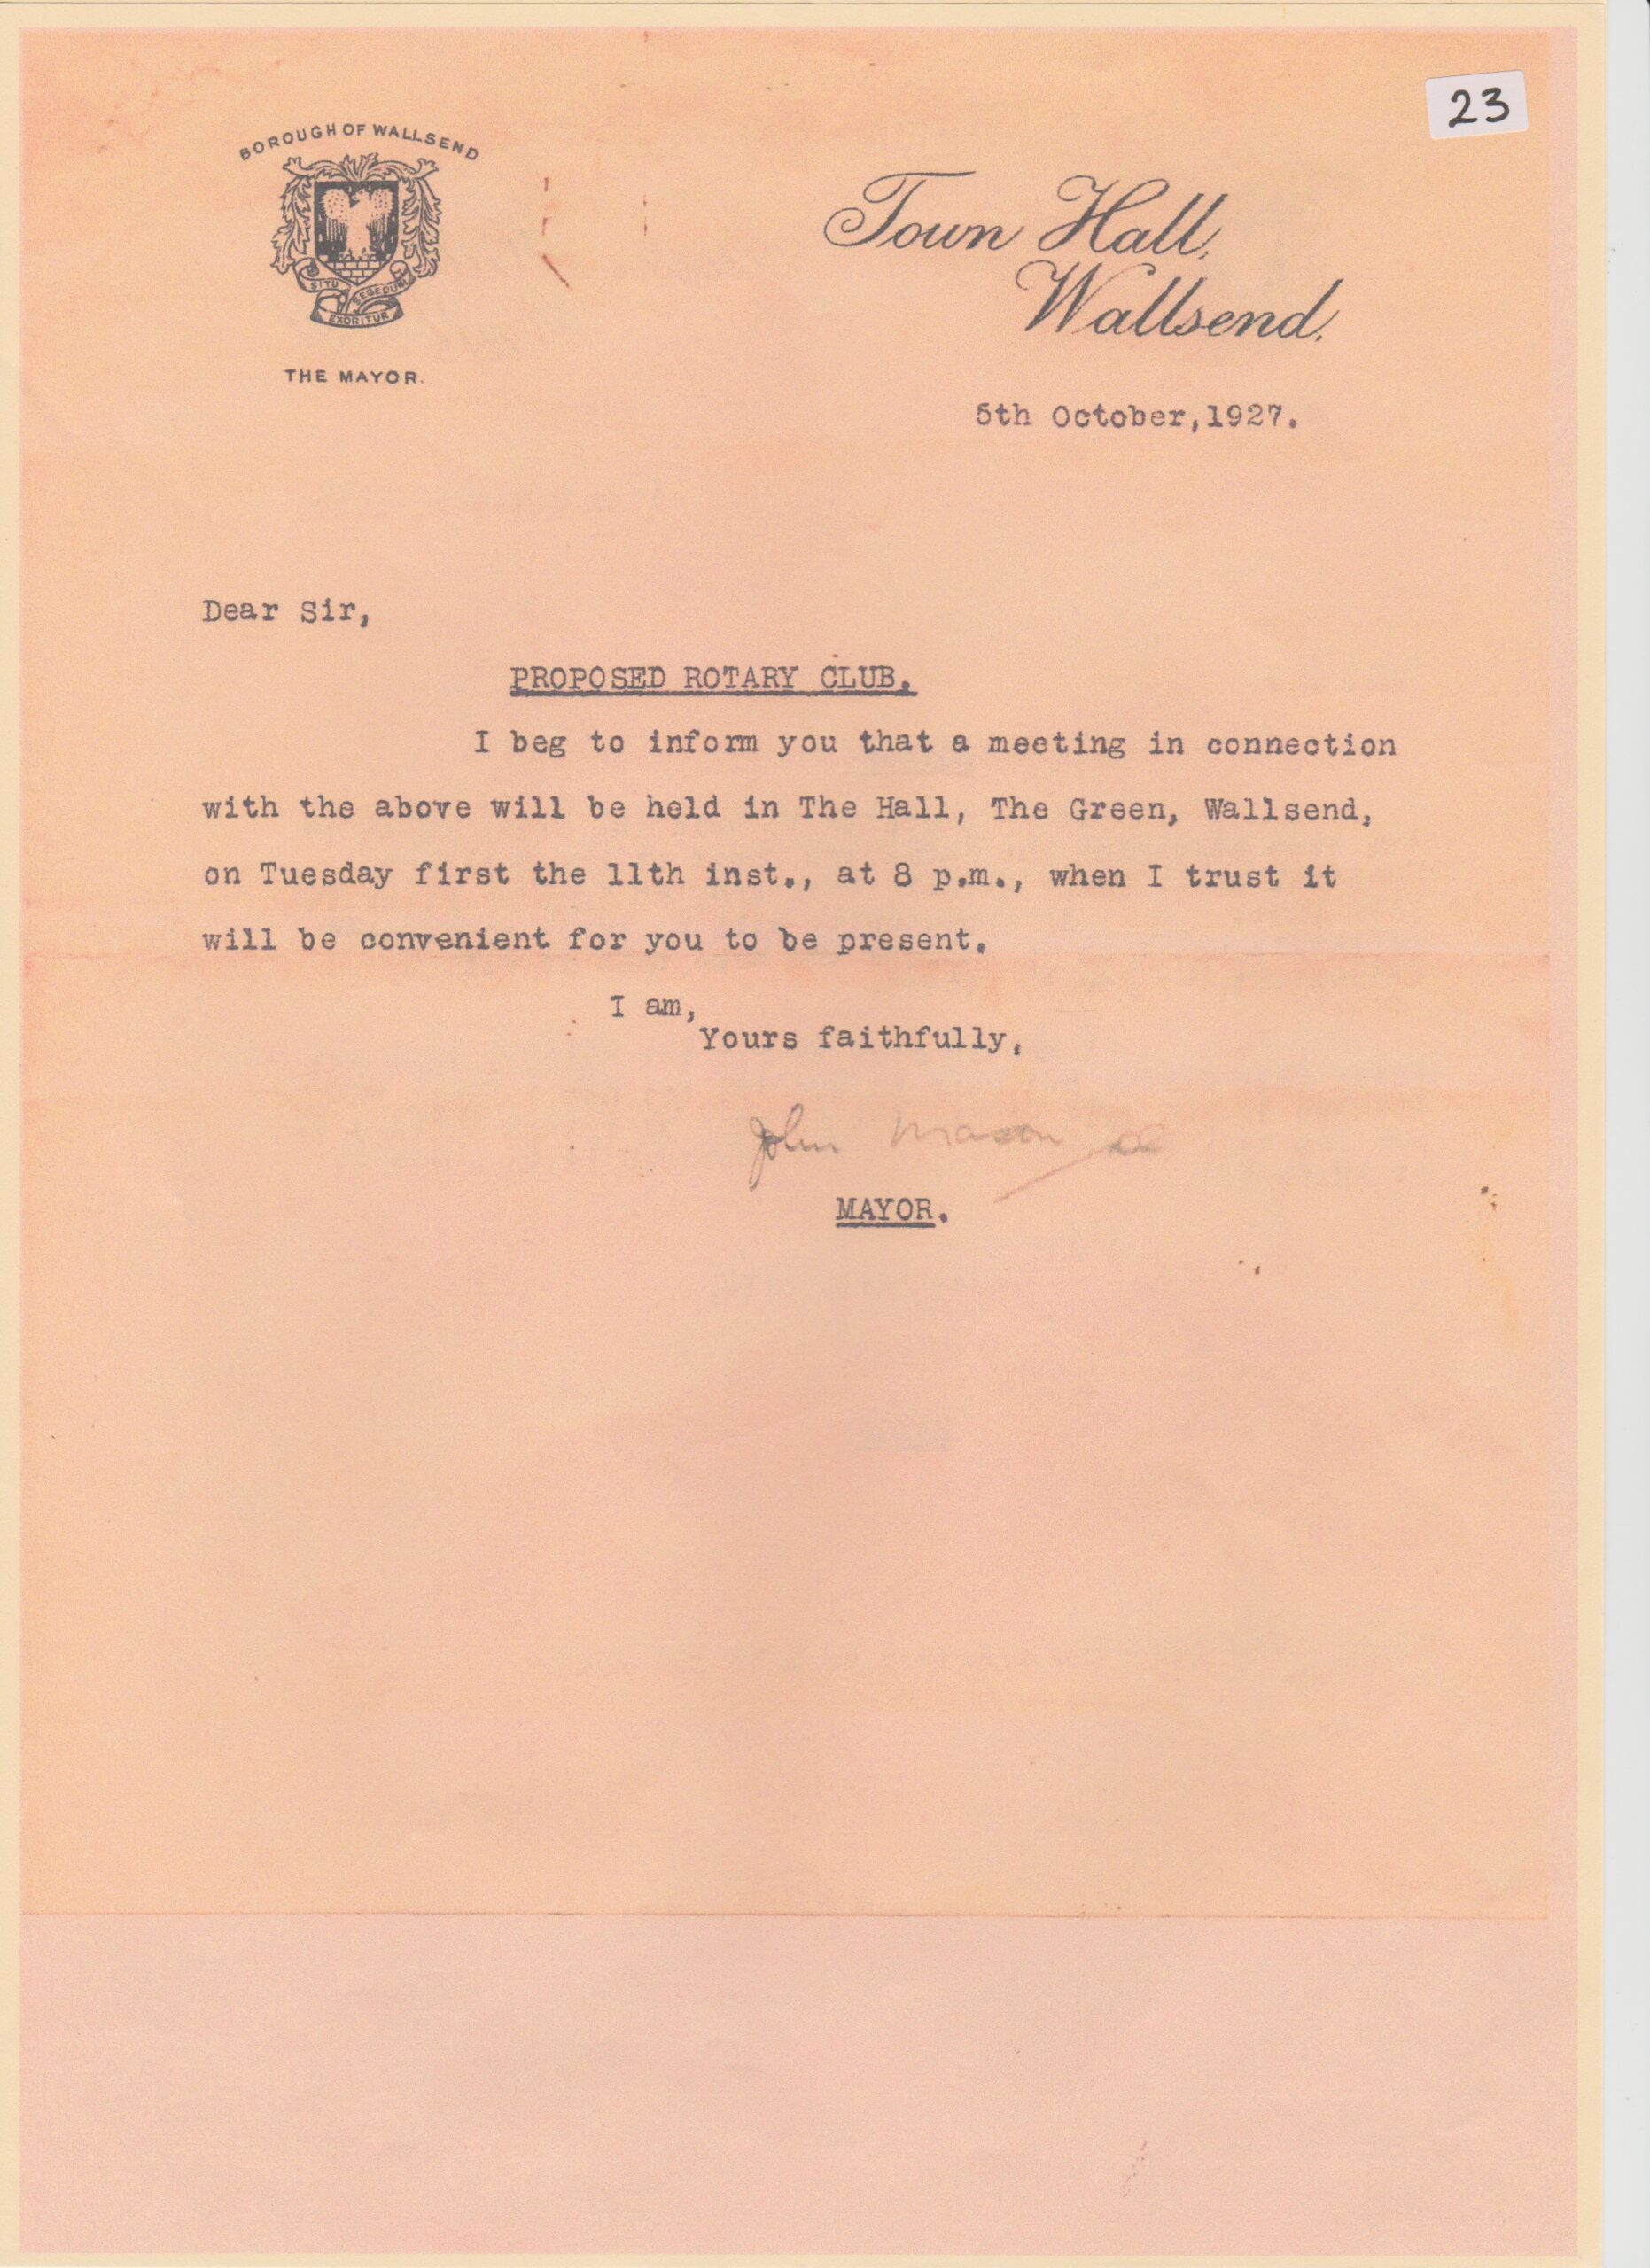 John Mason letter dated 5th October 1927 on proposed rotary club